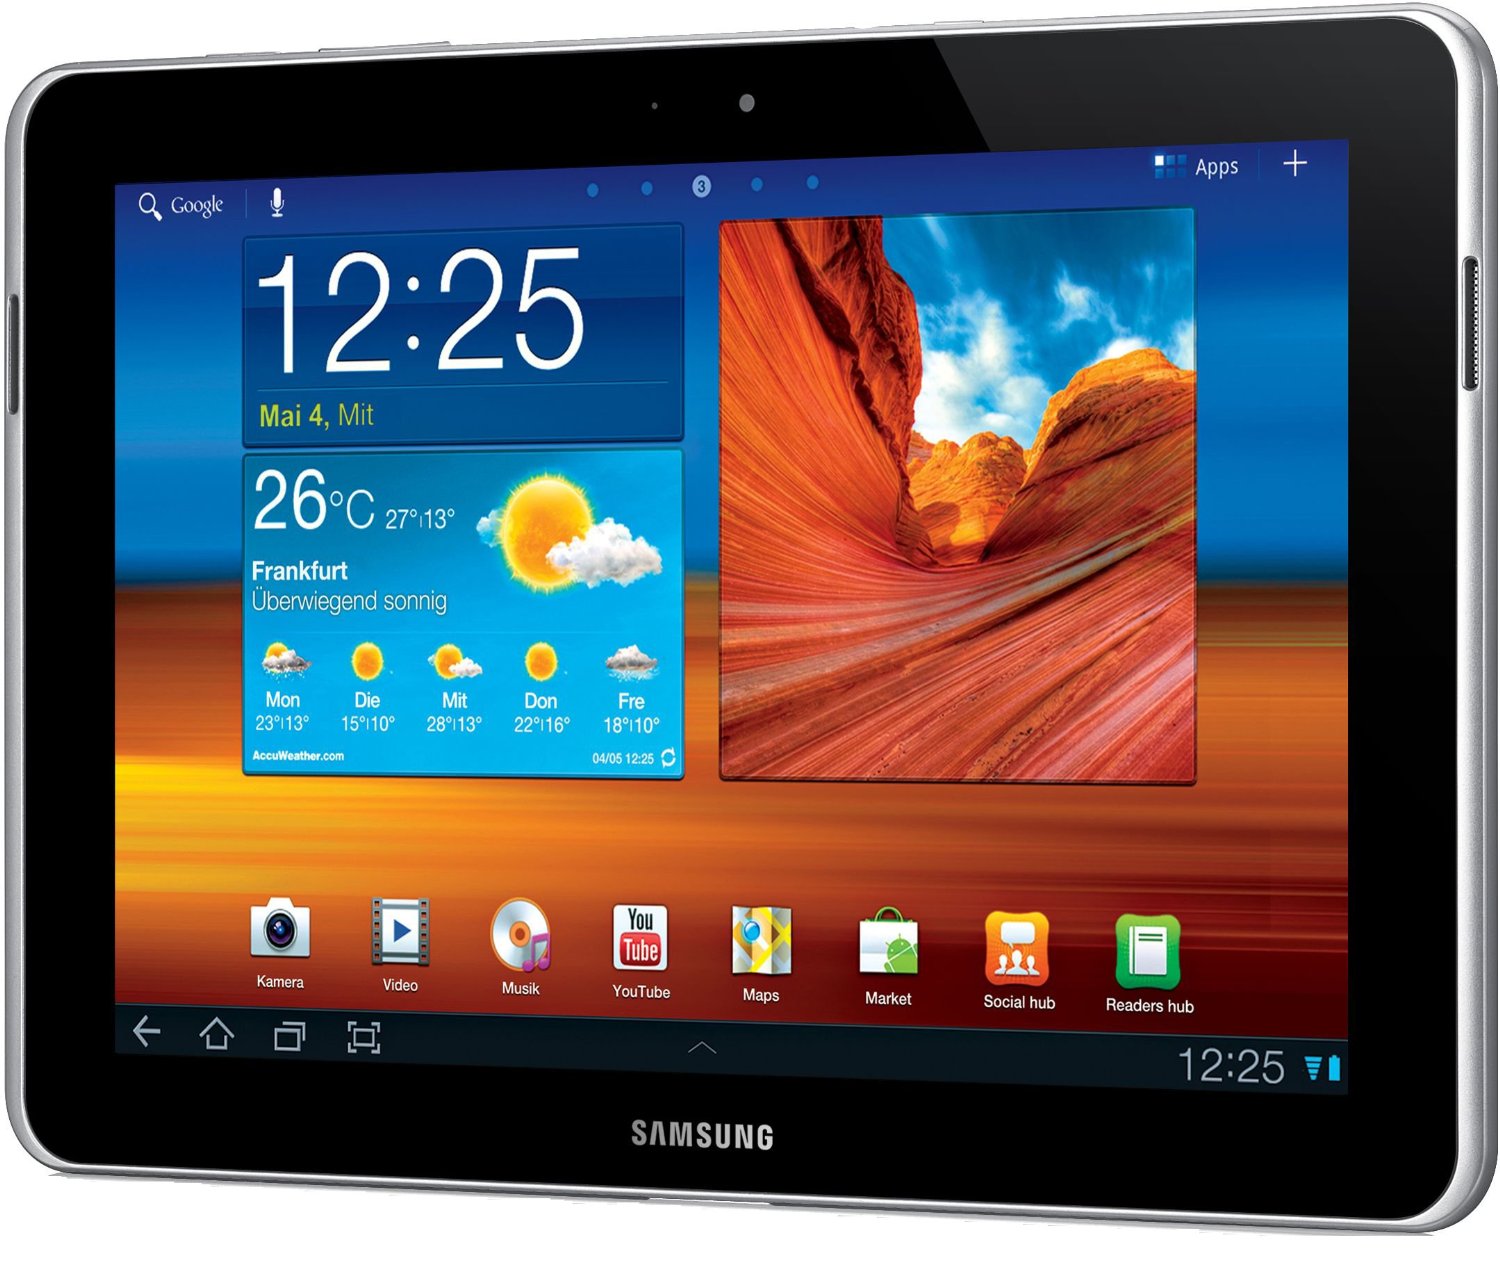 Download Android 5.0 Lollipop Rom For Galaxy Tab 10.1 P7510